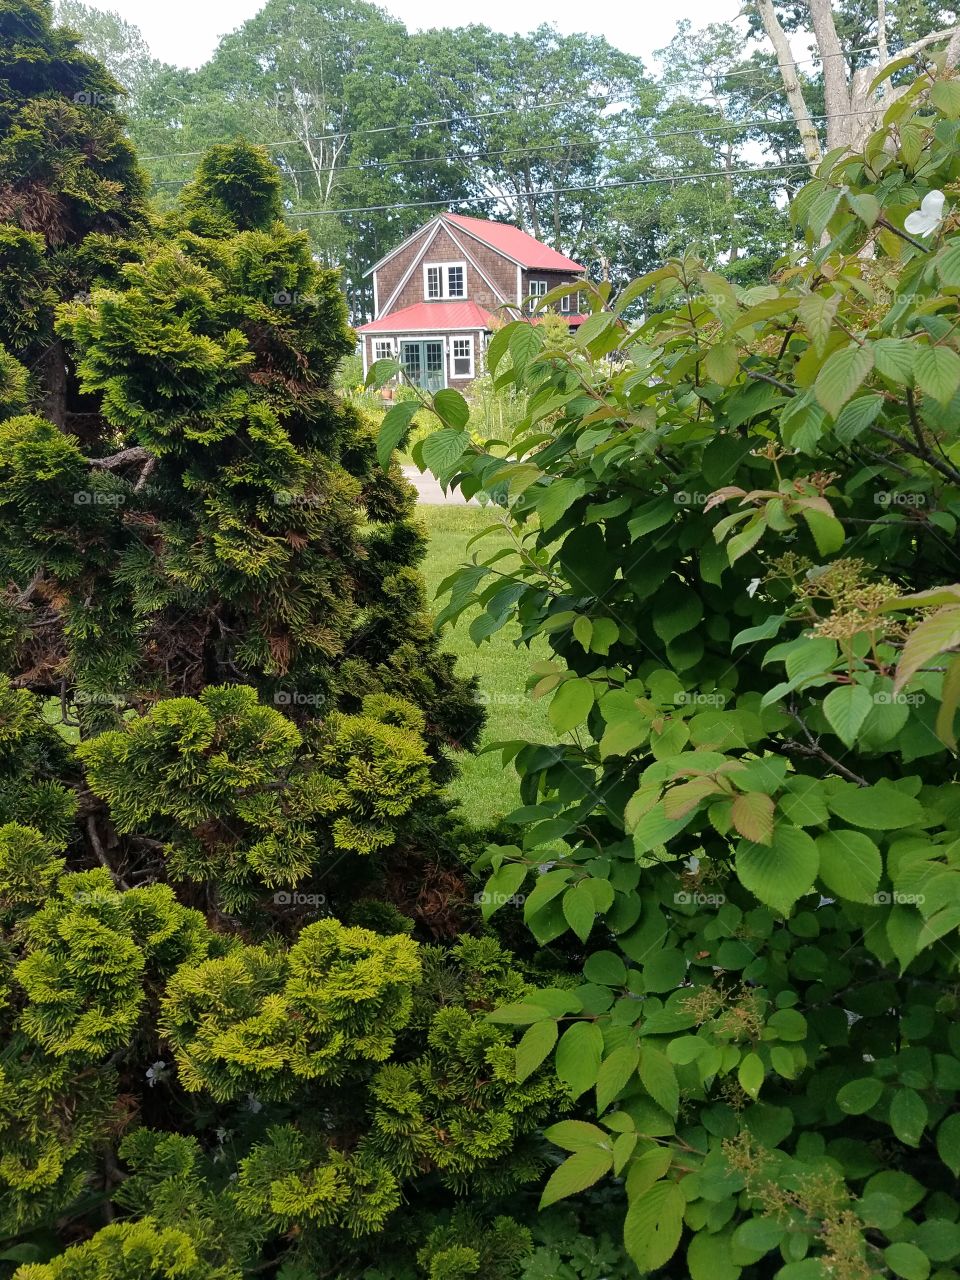 Red roof house peaking through bushes